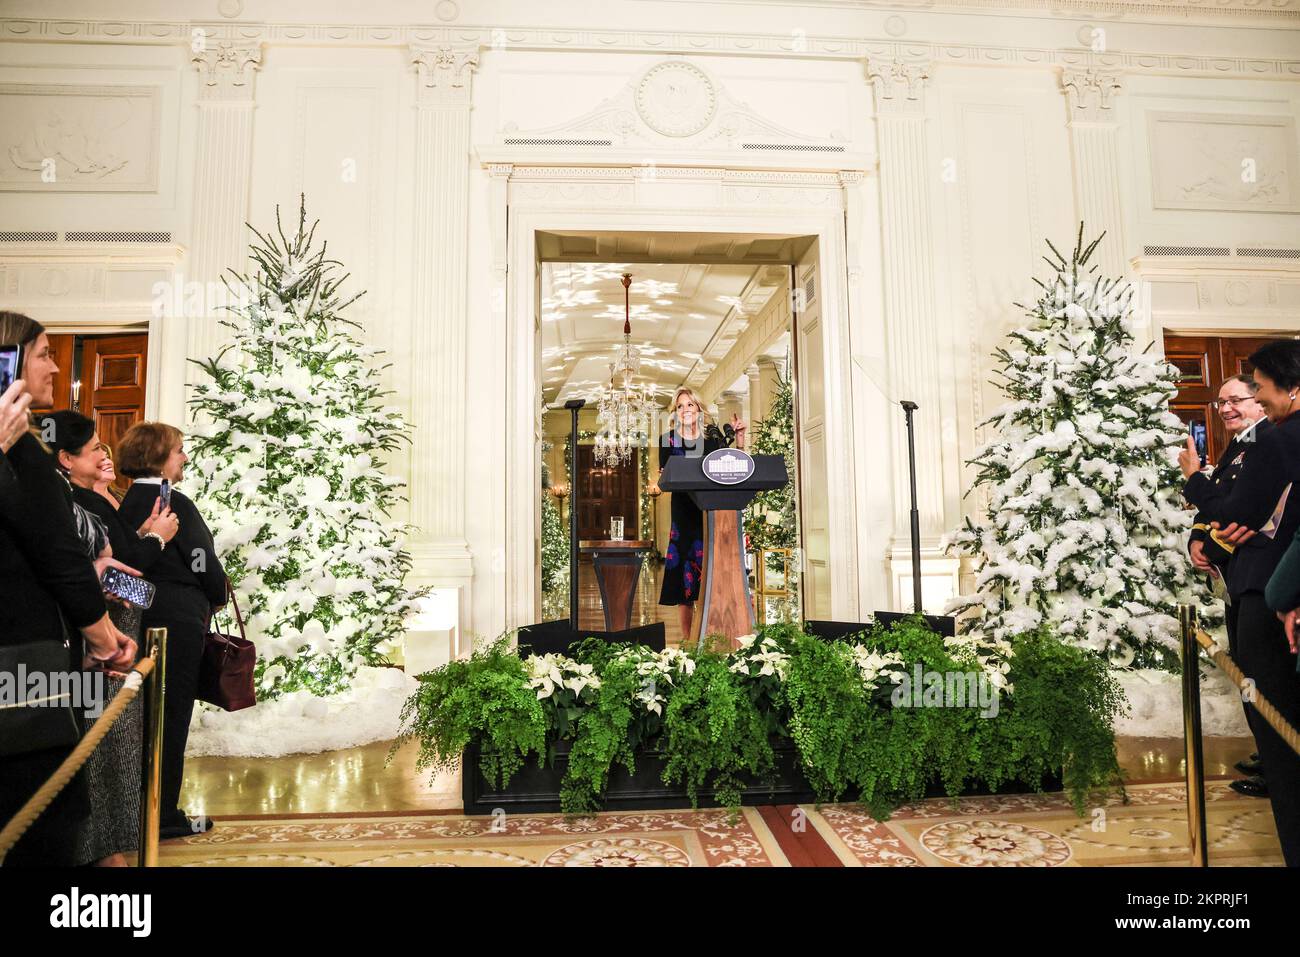 https://c8.alamy.com/comp/2KPRJF1/washington-united-states-28th-nov-2022-first-lady-jill-biden-speaks-to-leadership-of-the-national-guard-and-volunteers-as-she-unveils-the-white-house-2022-holiday-decorations-at-the-white-house-on-monday-november-28-2022-photo-by-jemal-countessupi-credit-upialamy-live-news-2KPRJF1.jpg